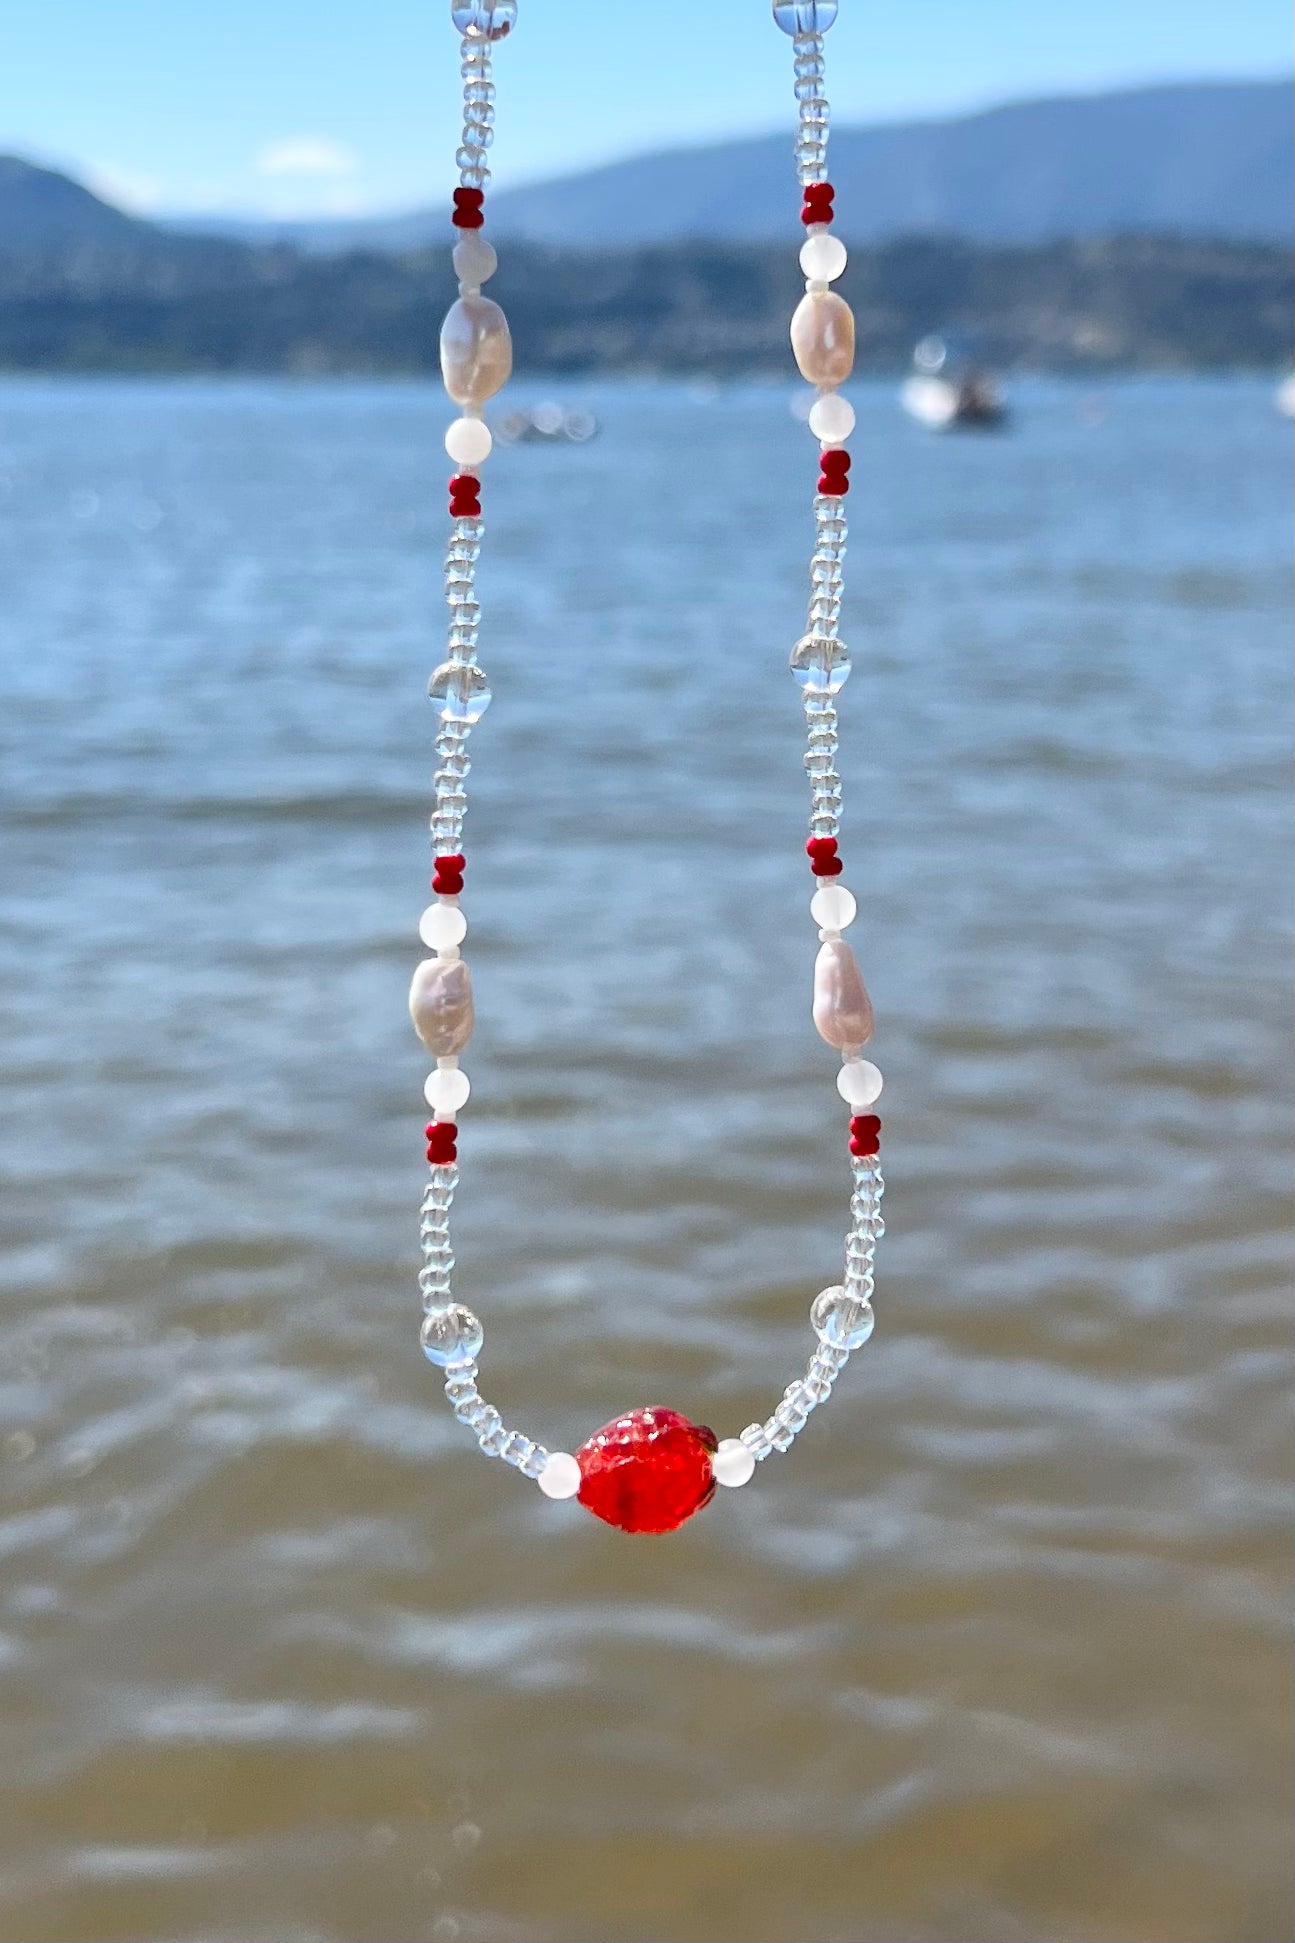 The strawberry necklace in bright, direct sunlight at a beach setting.